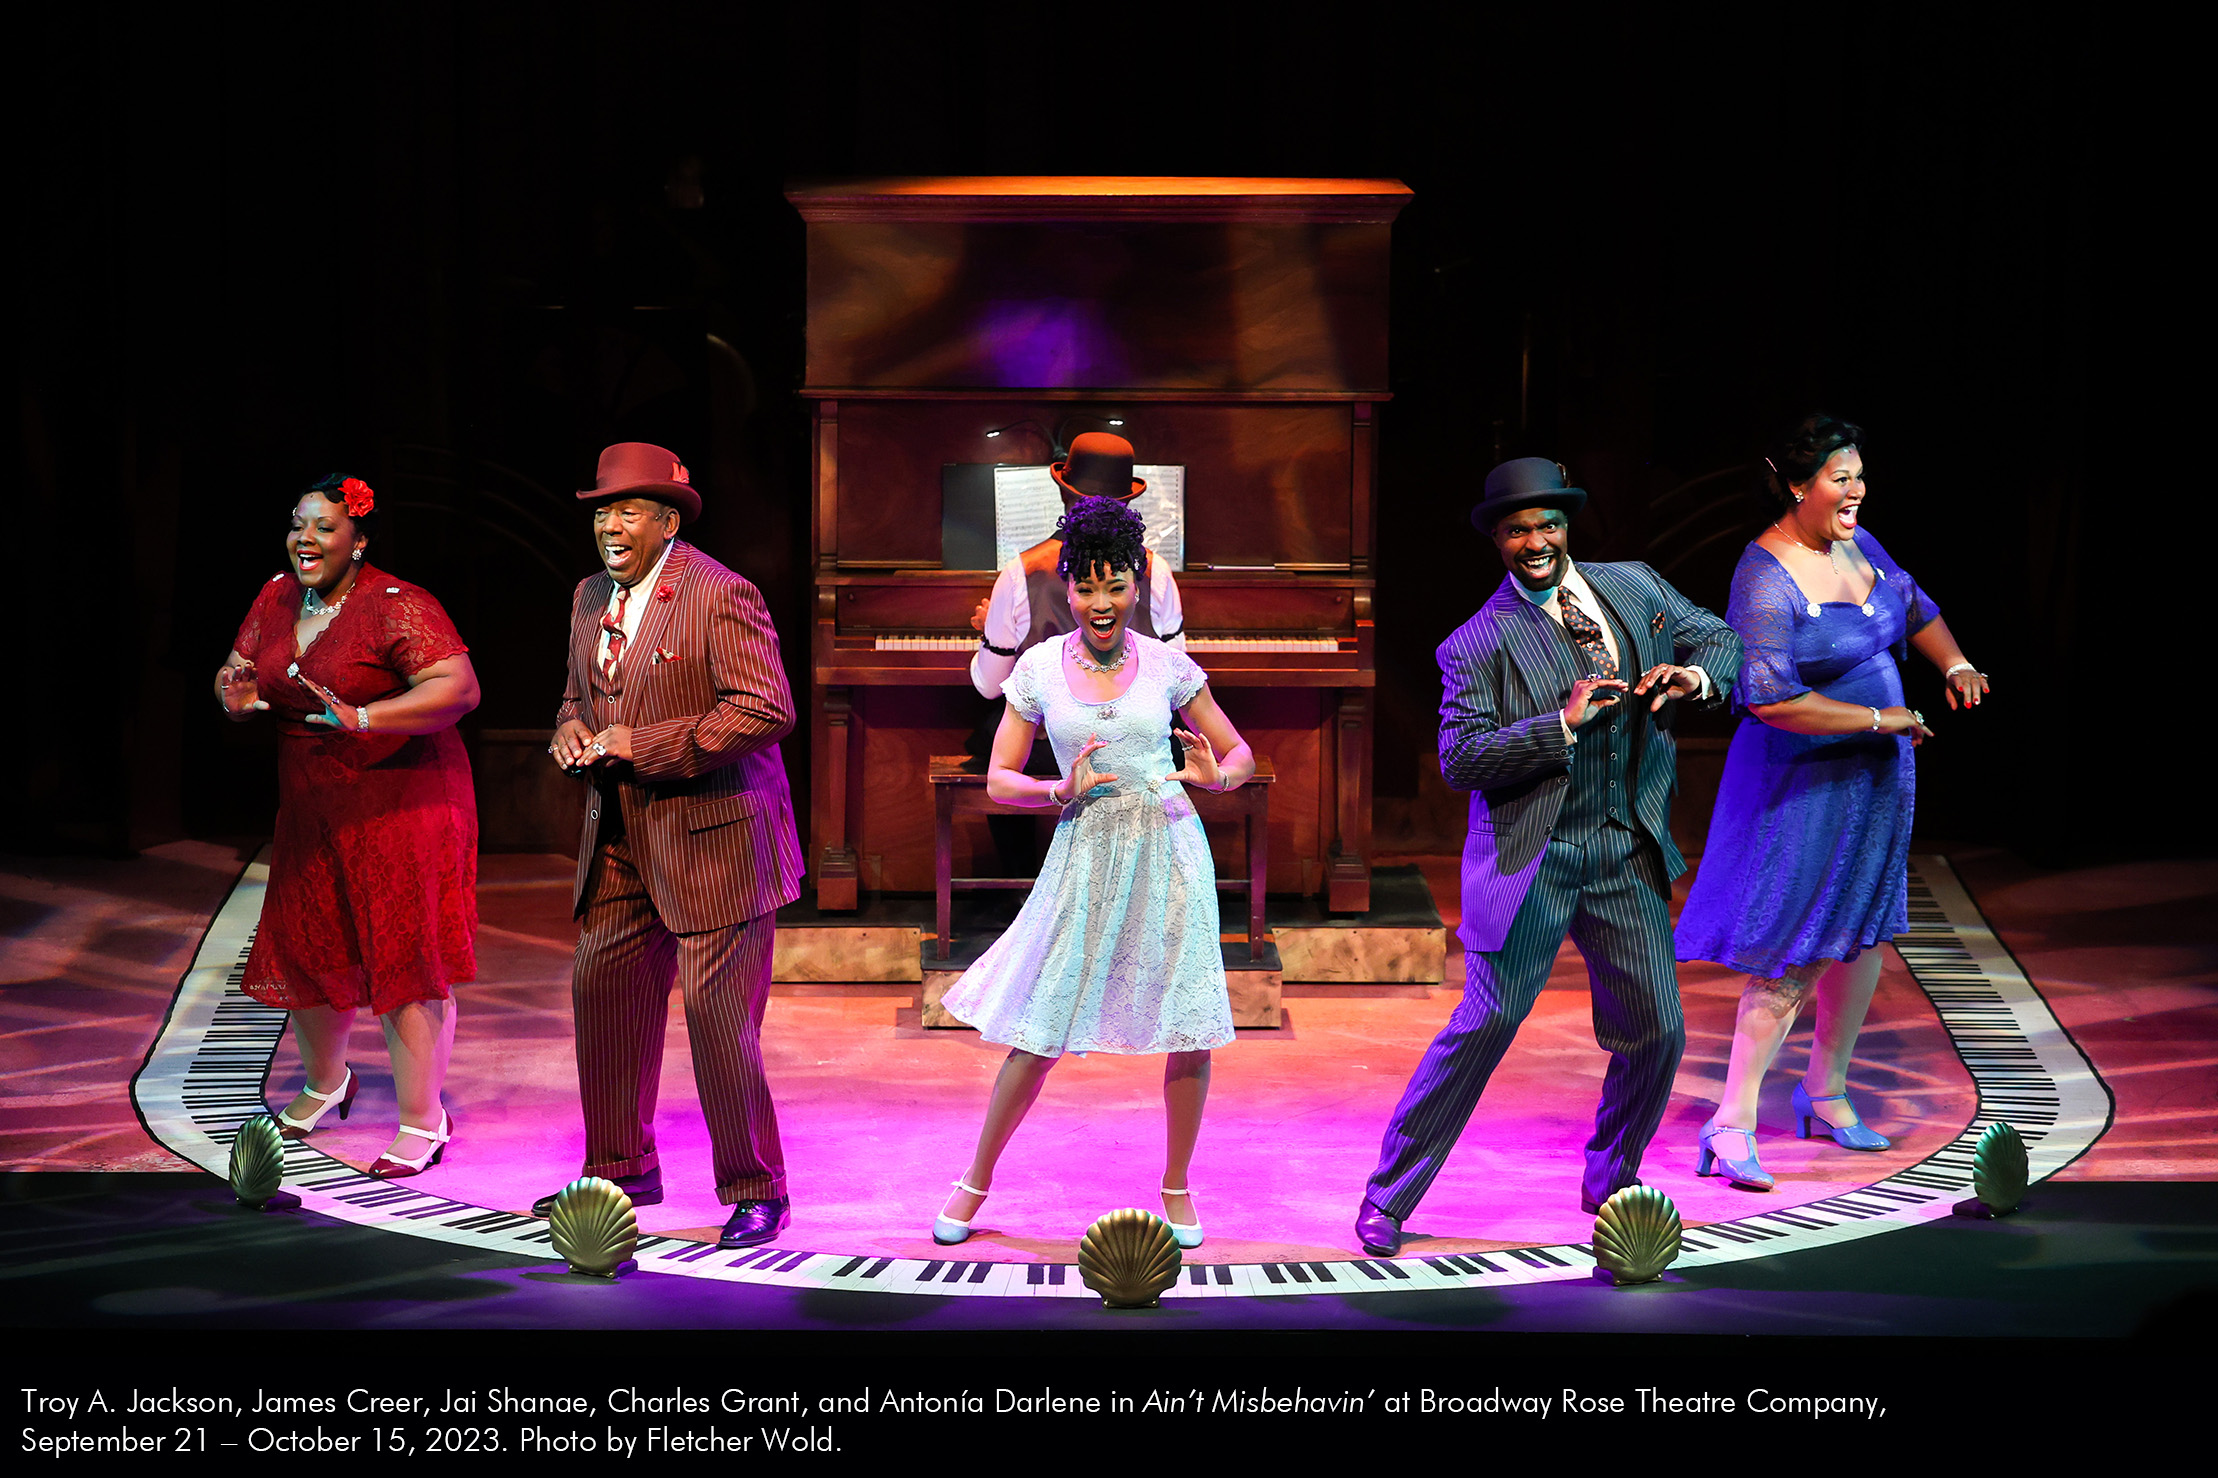 Troy A. Jackson, James Creer, Jai Shane, Charles Grant, and Antonía Darlene in Ain't Misbehavin' at Broadway Rose Theatre Company, September 21 - October 15, 2023. Photo by Fletcher Wold.